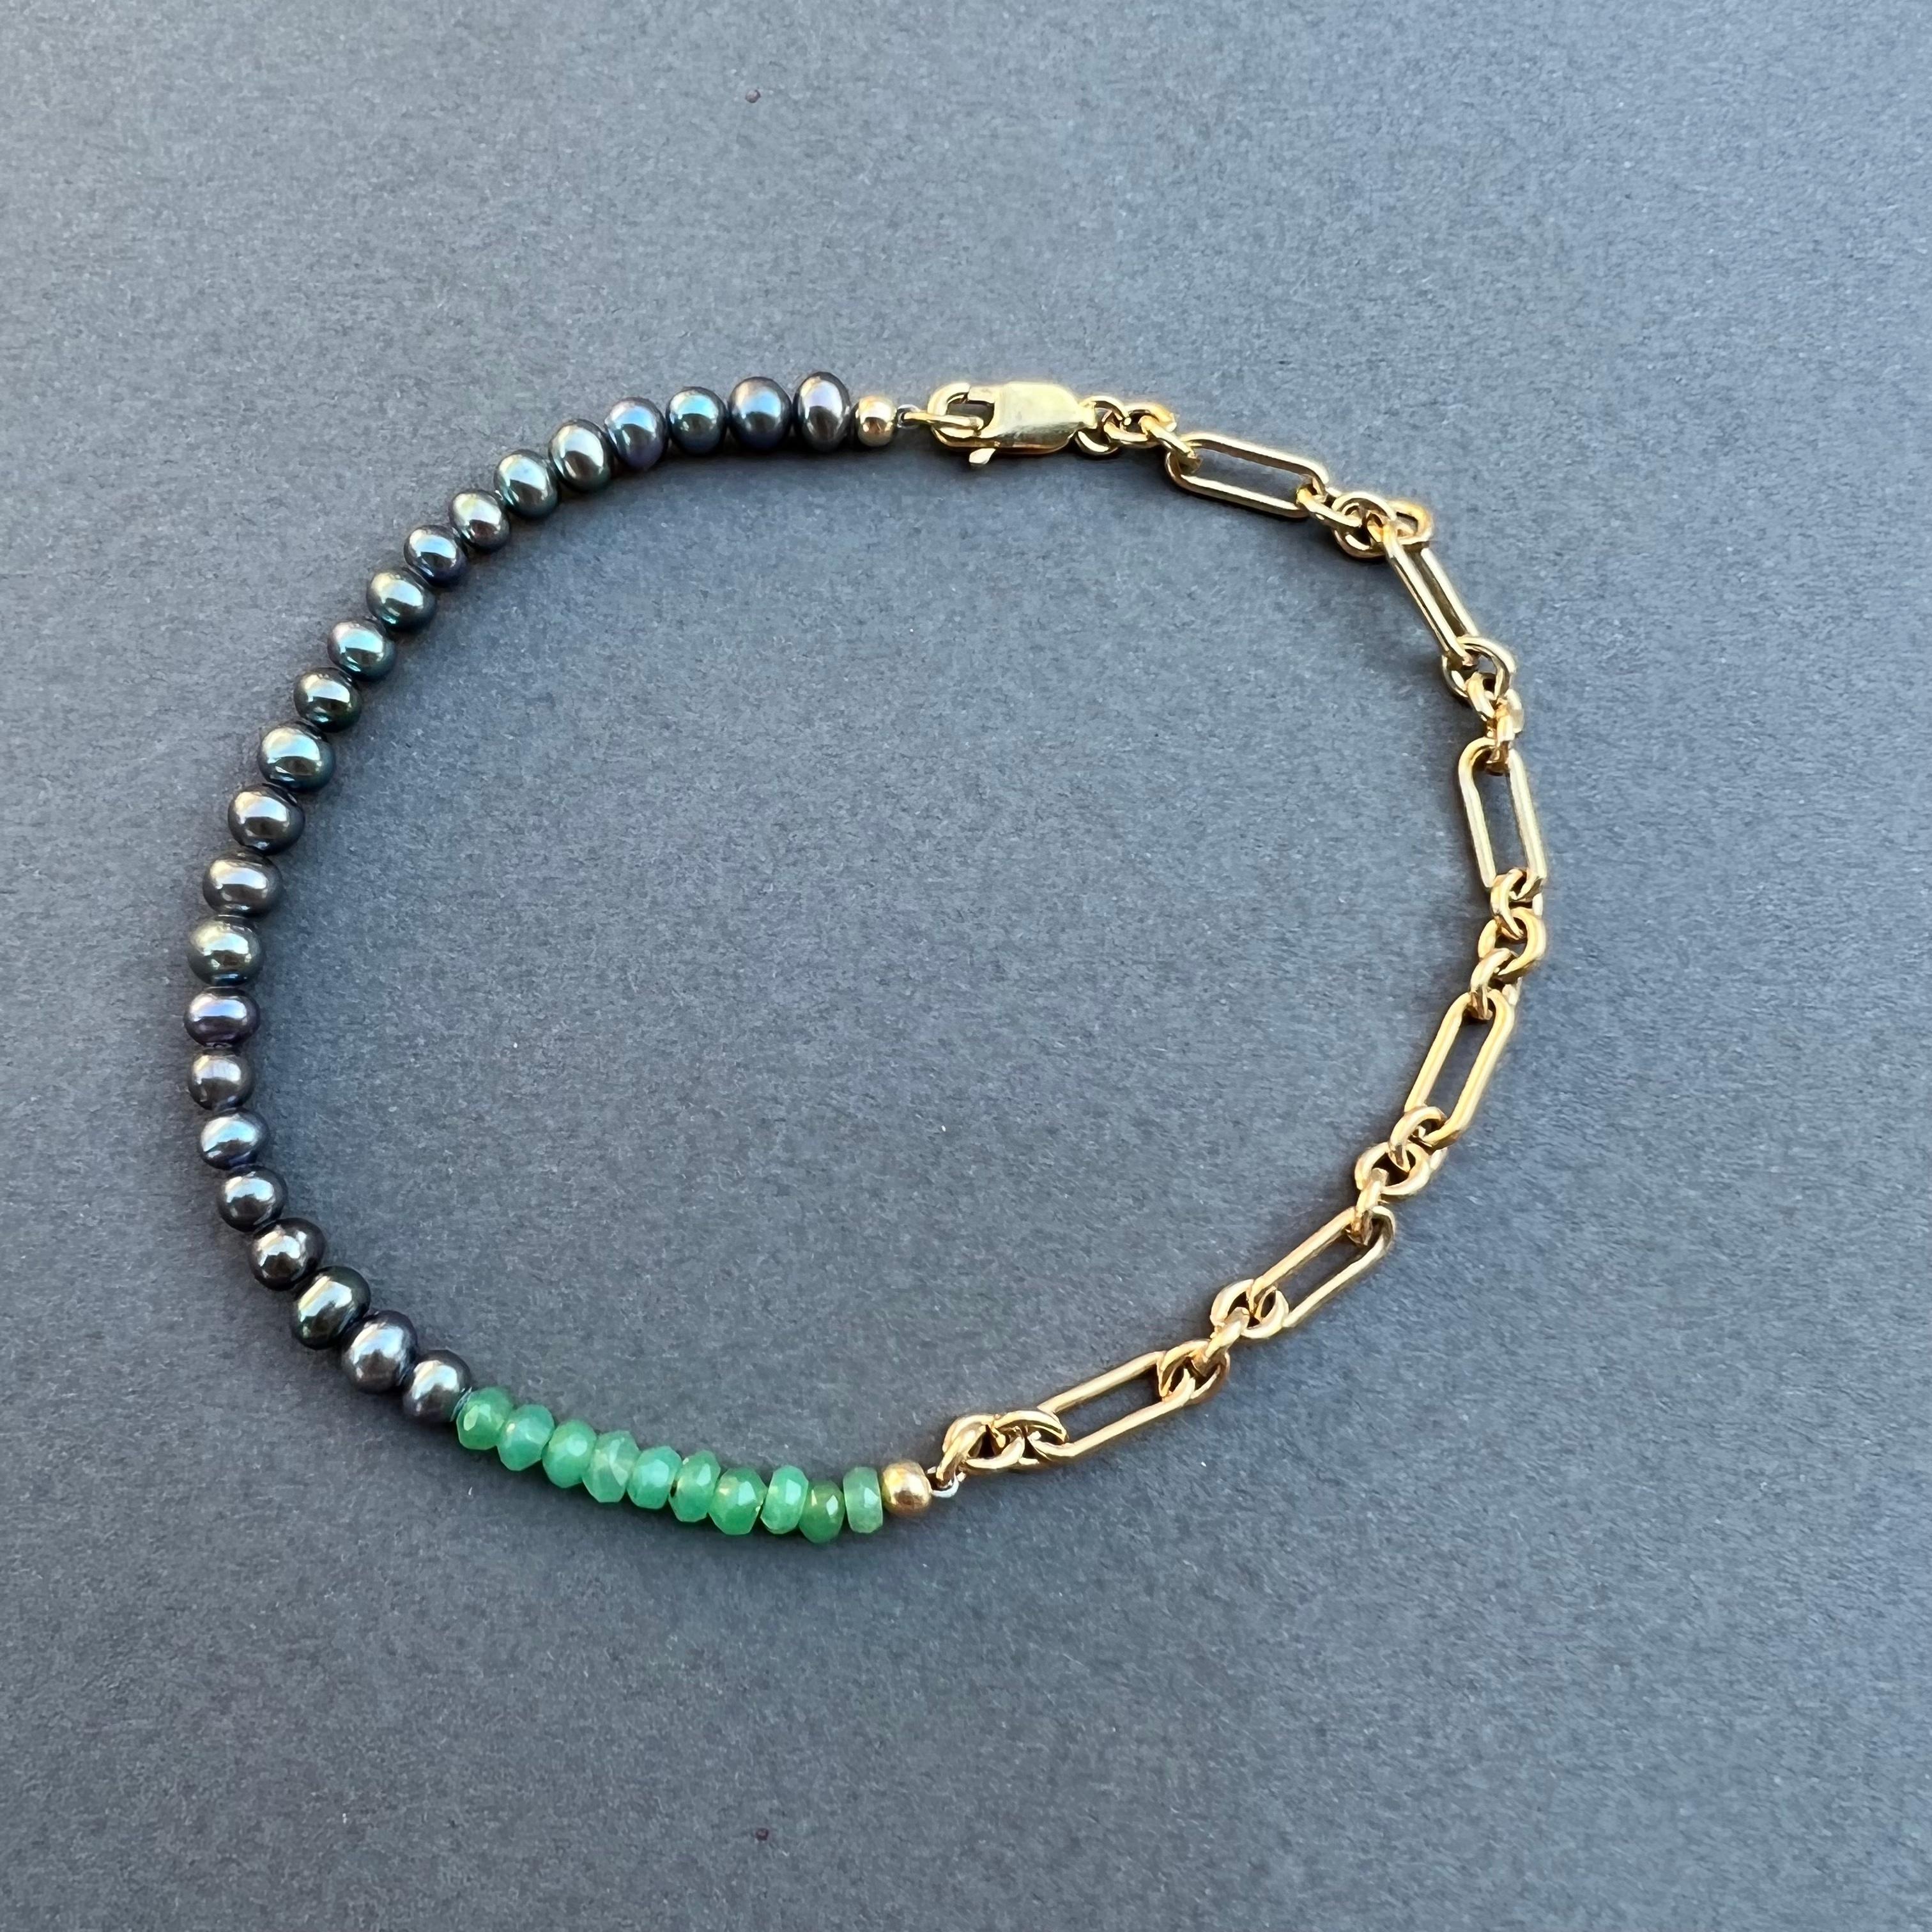 Round Cut Black Pearl Ankle Bracelet Chain Chrysoprase J Dauphin For Sale